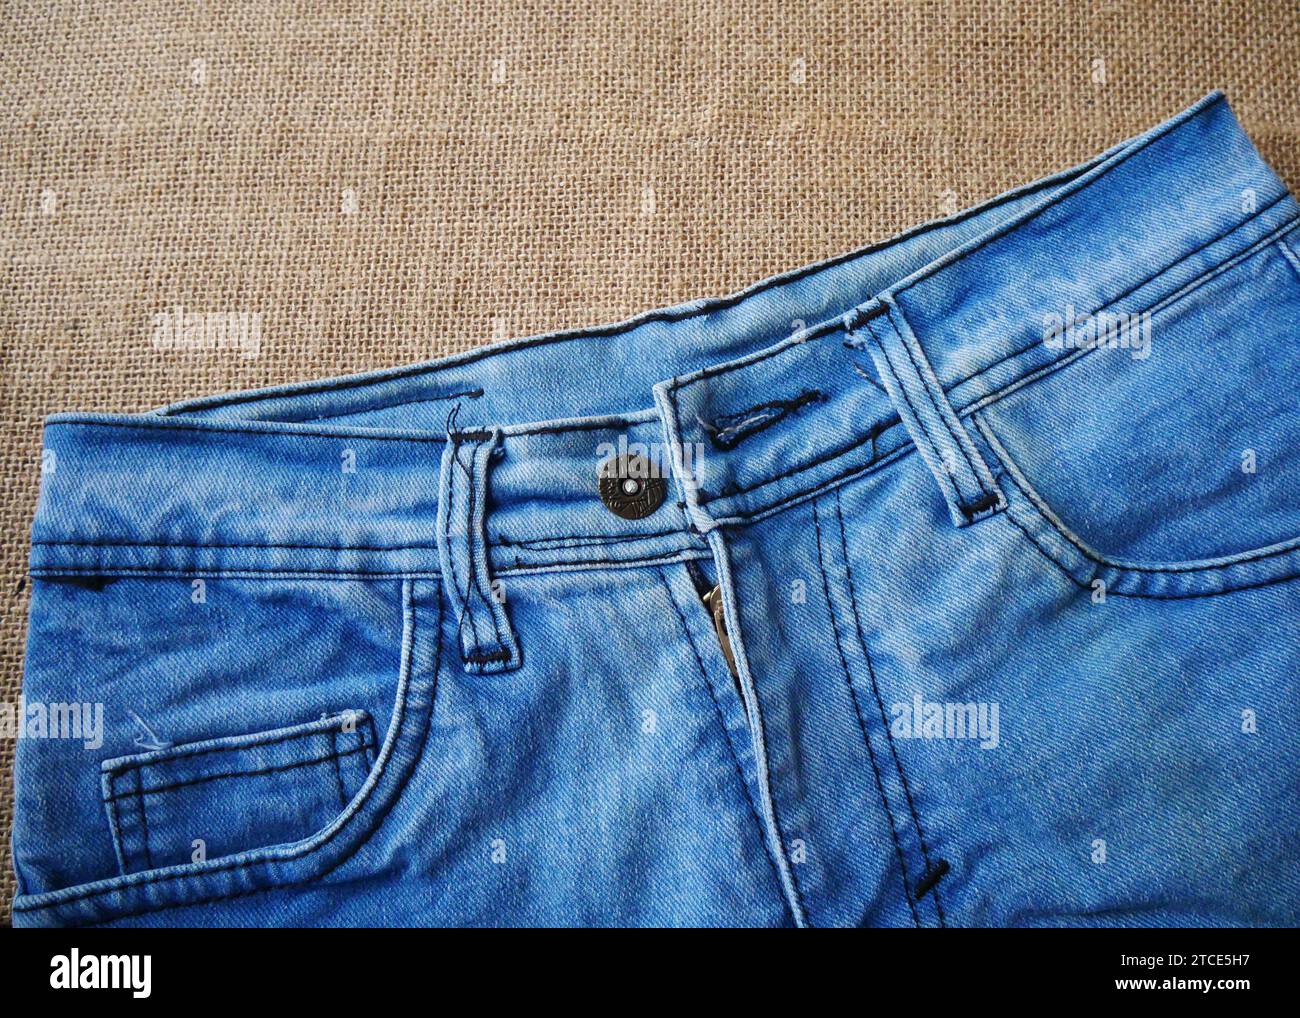 Blue jeans back view on burlap background. Jeans texture. Fashion denim background for sewing, copy space. Stock Photo